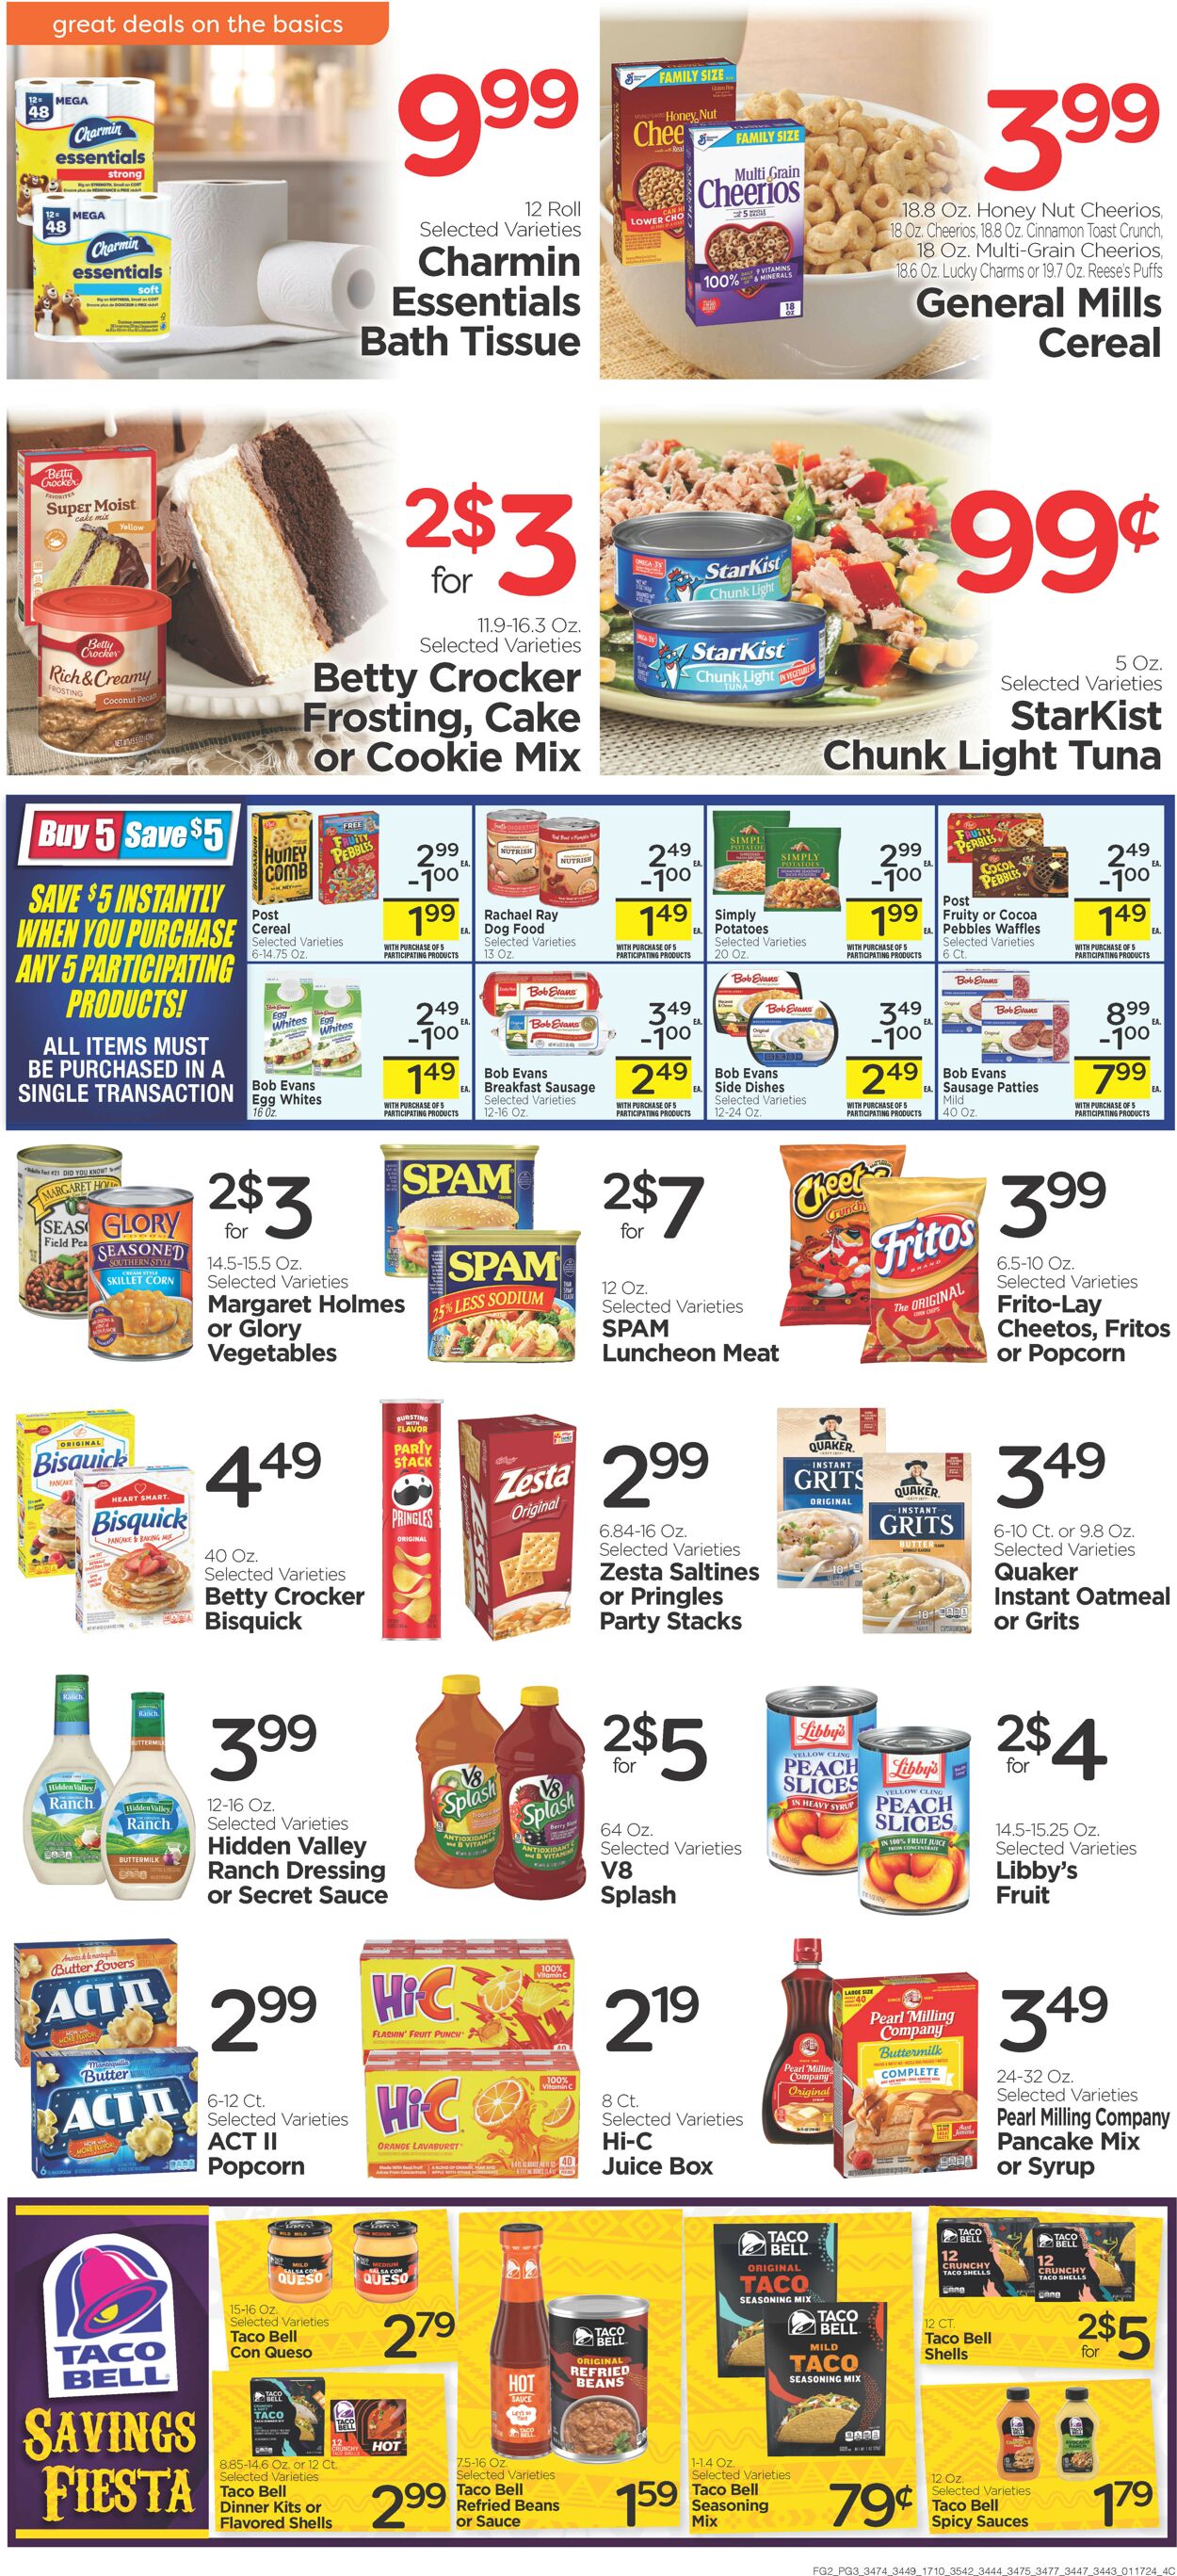 Catalogue Edwards Food Giant from 01/17/2024